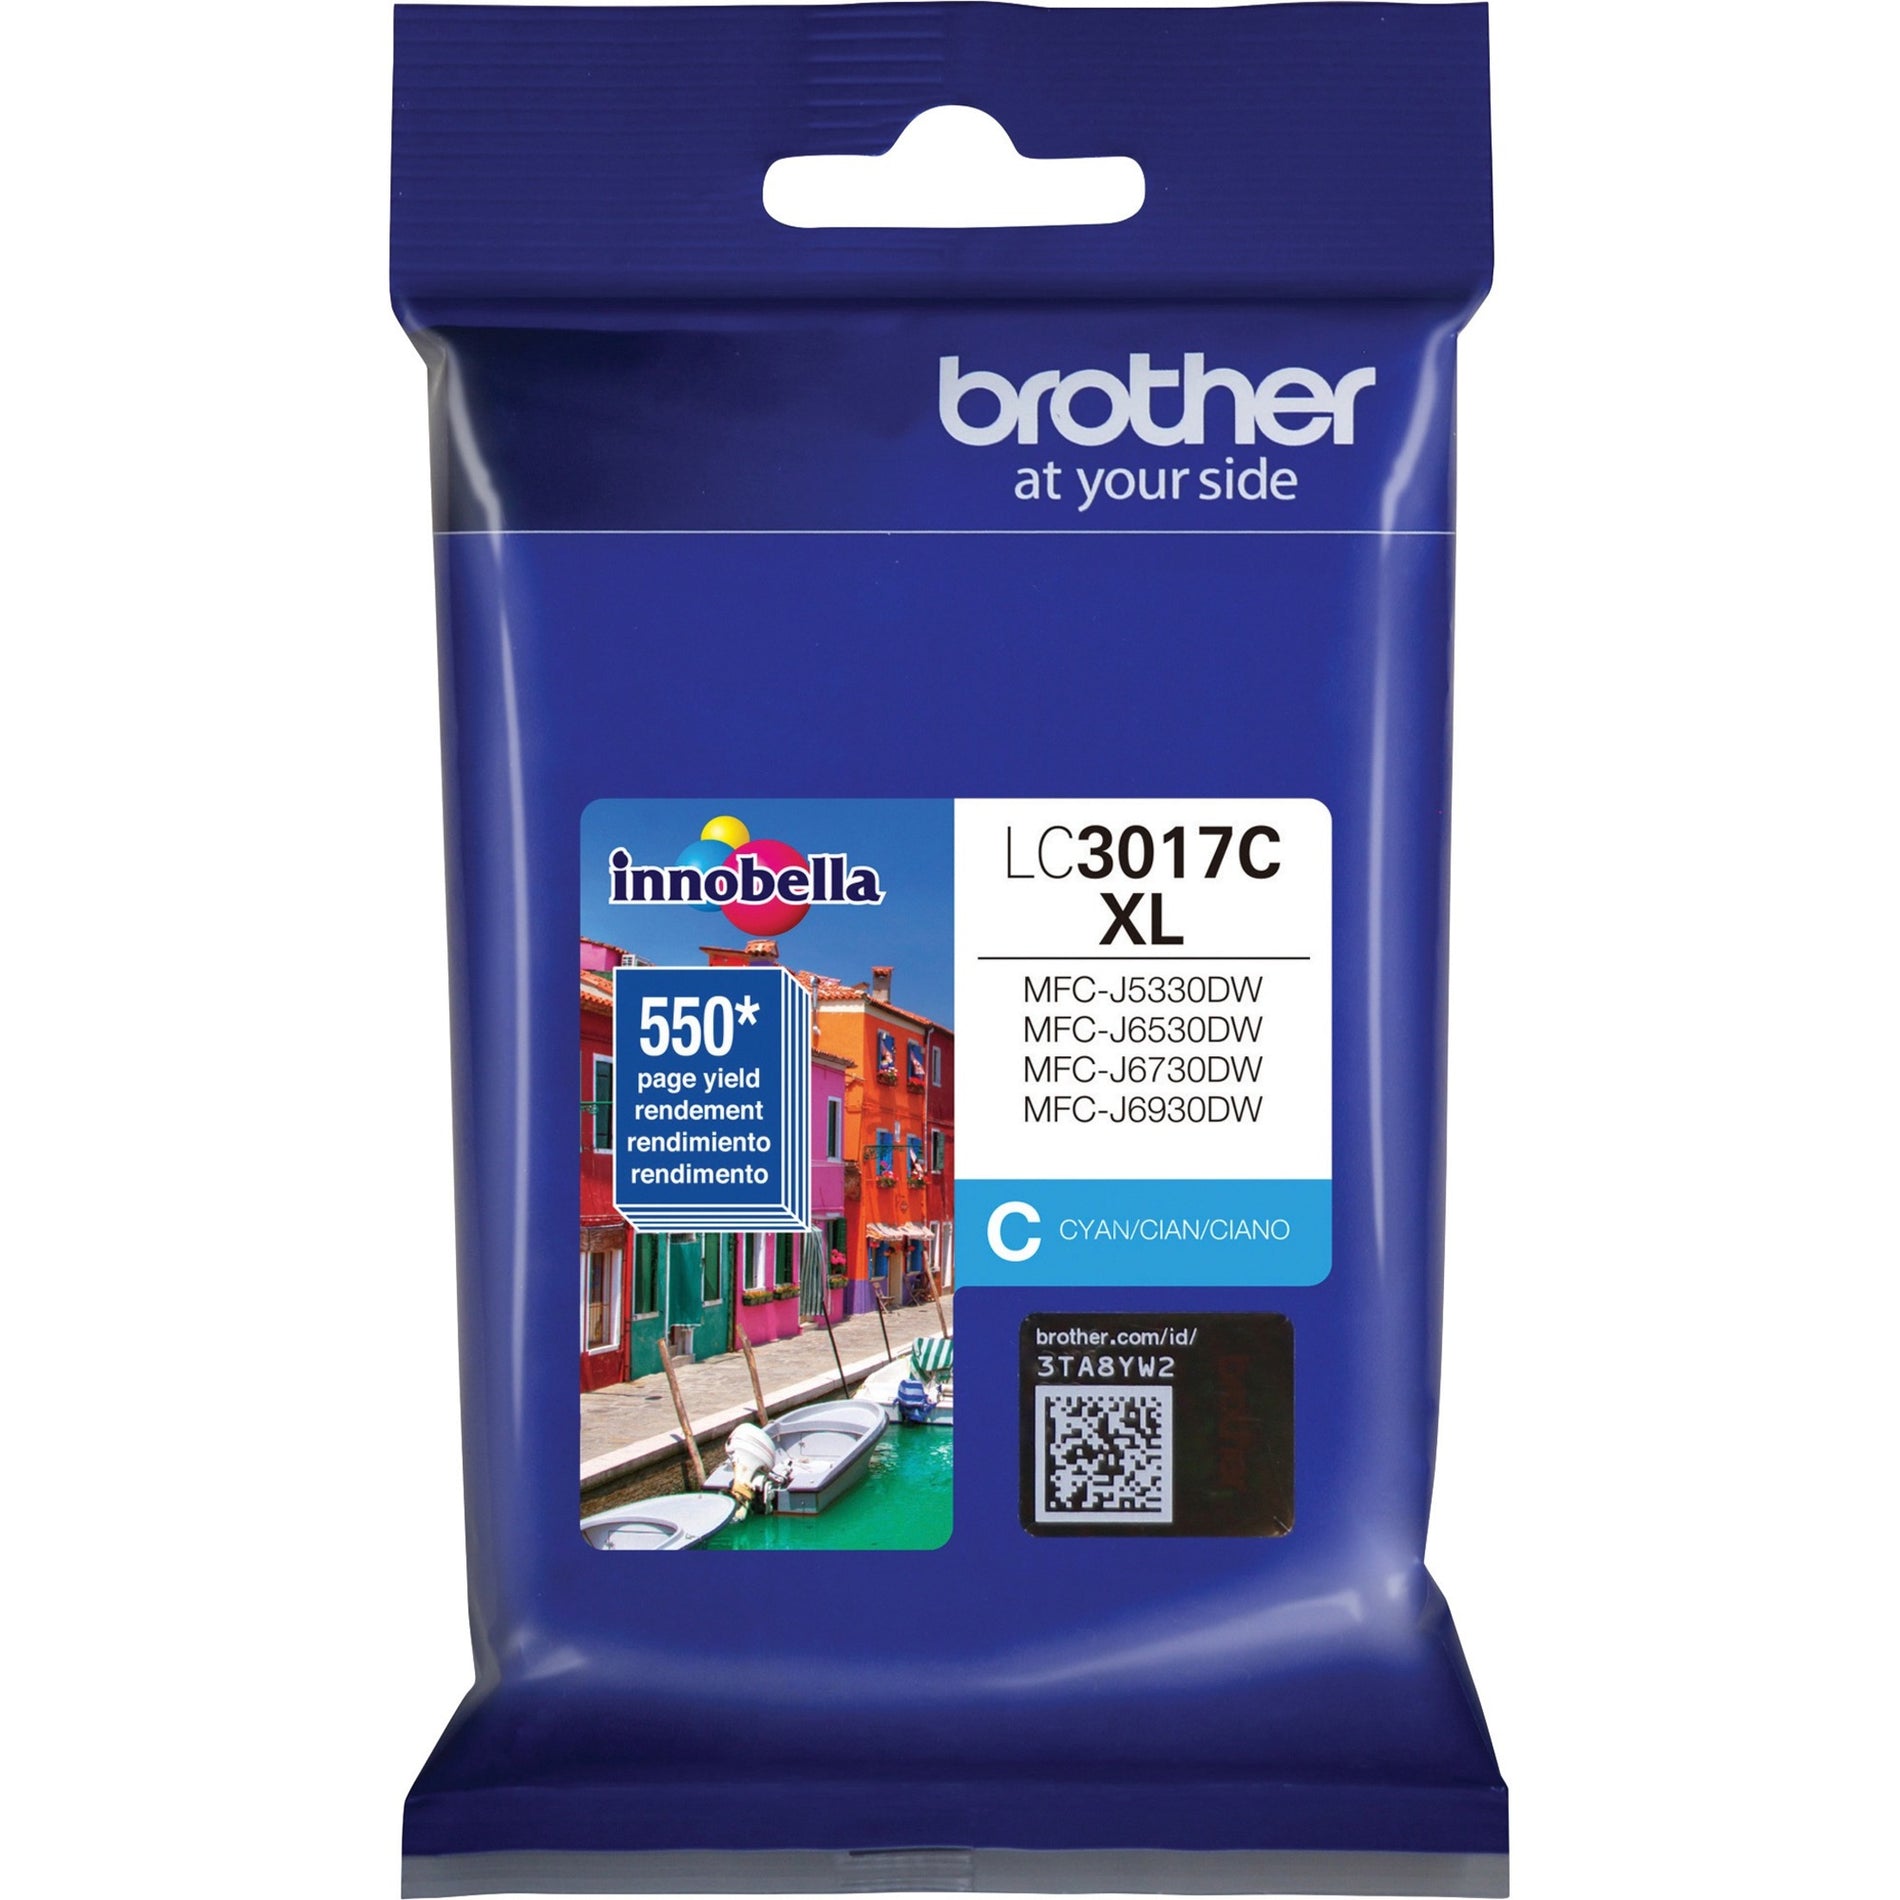 Brother LC3017C Innobella High Yield Ink Cartridge, Cyan - 550 Pages